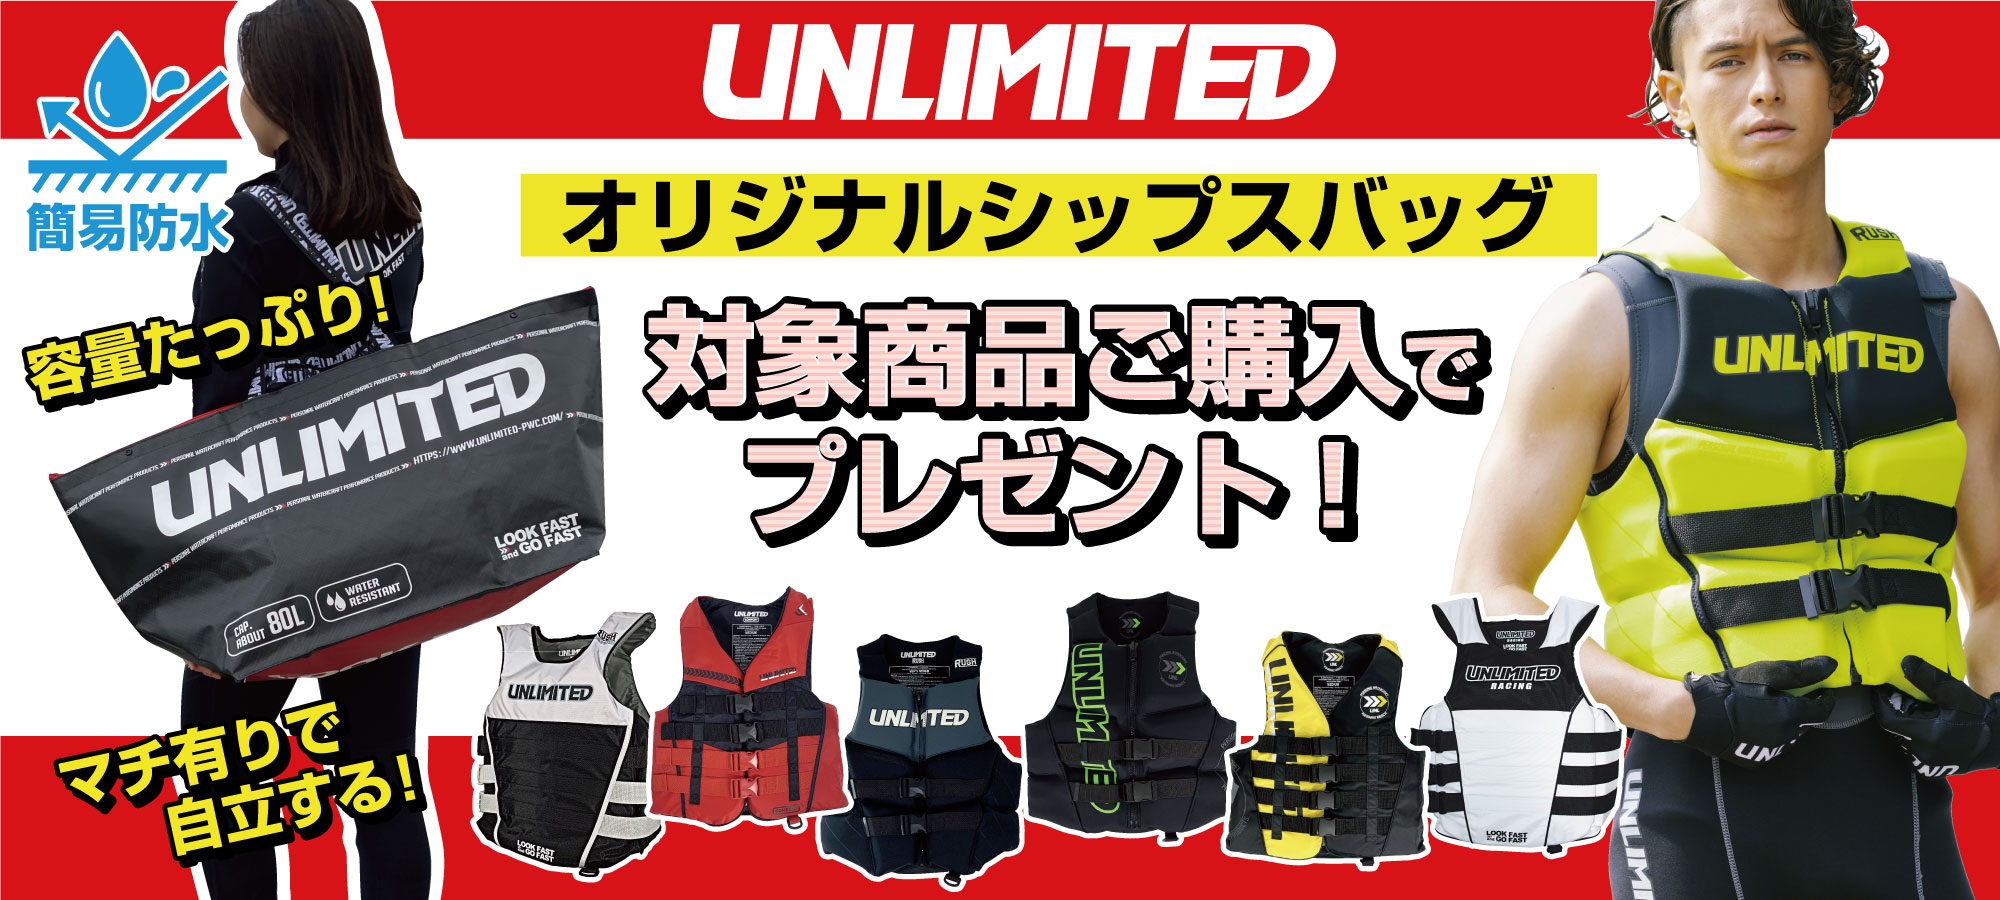 unlimitedバッグ